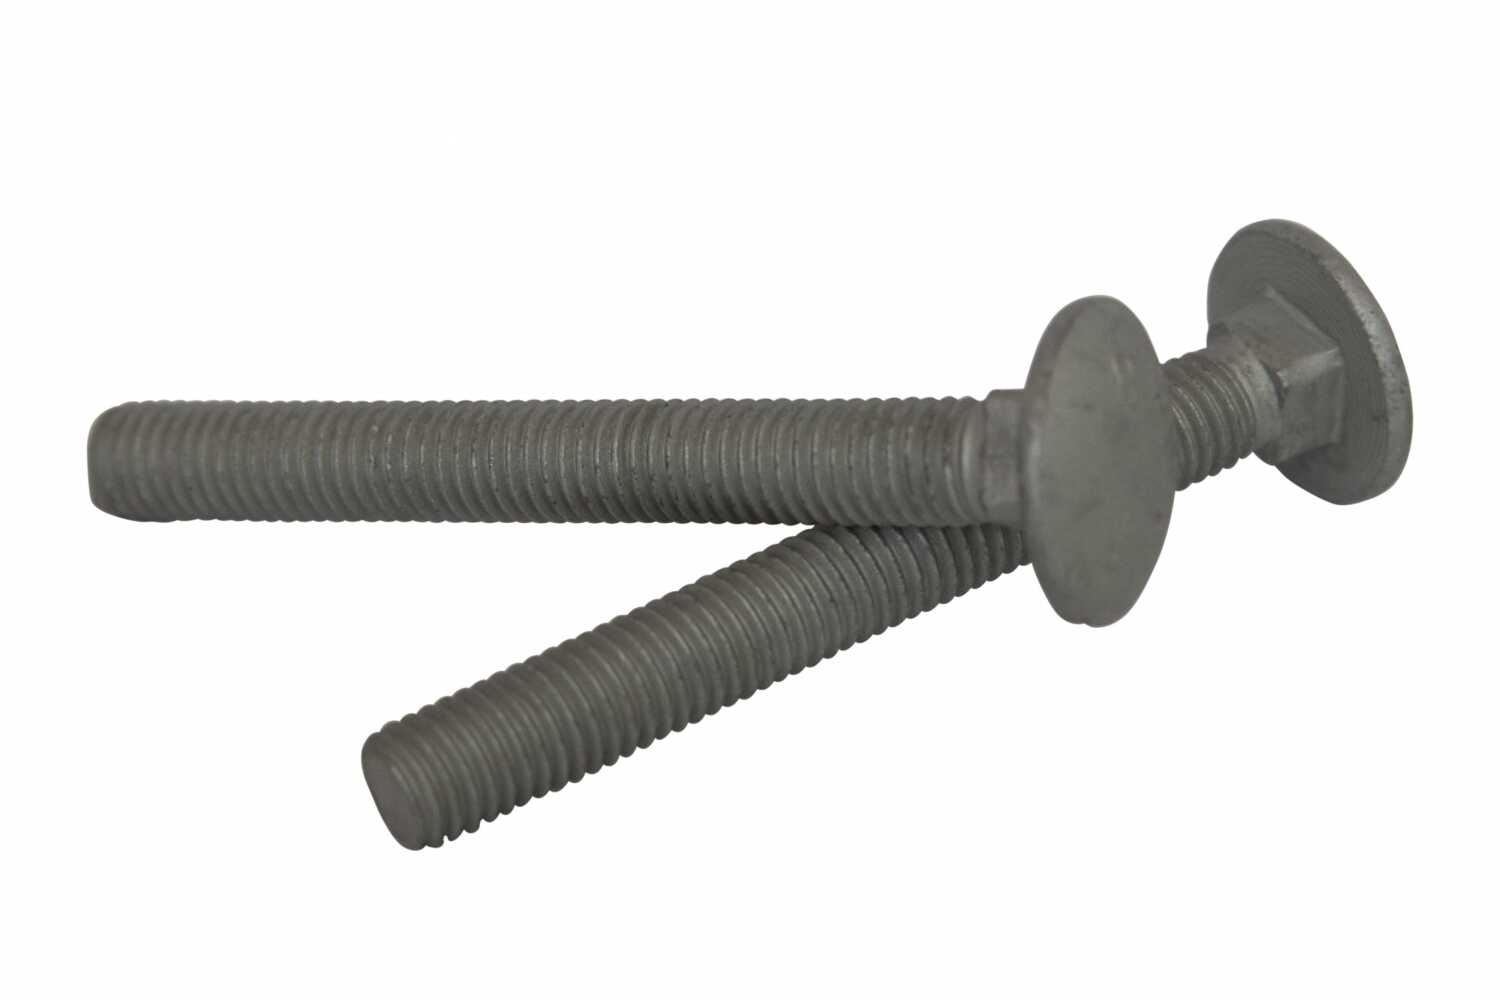 DIN 603 4.8 zinc plated Bolt with a semicircular head and a square headrest